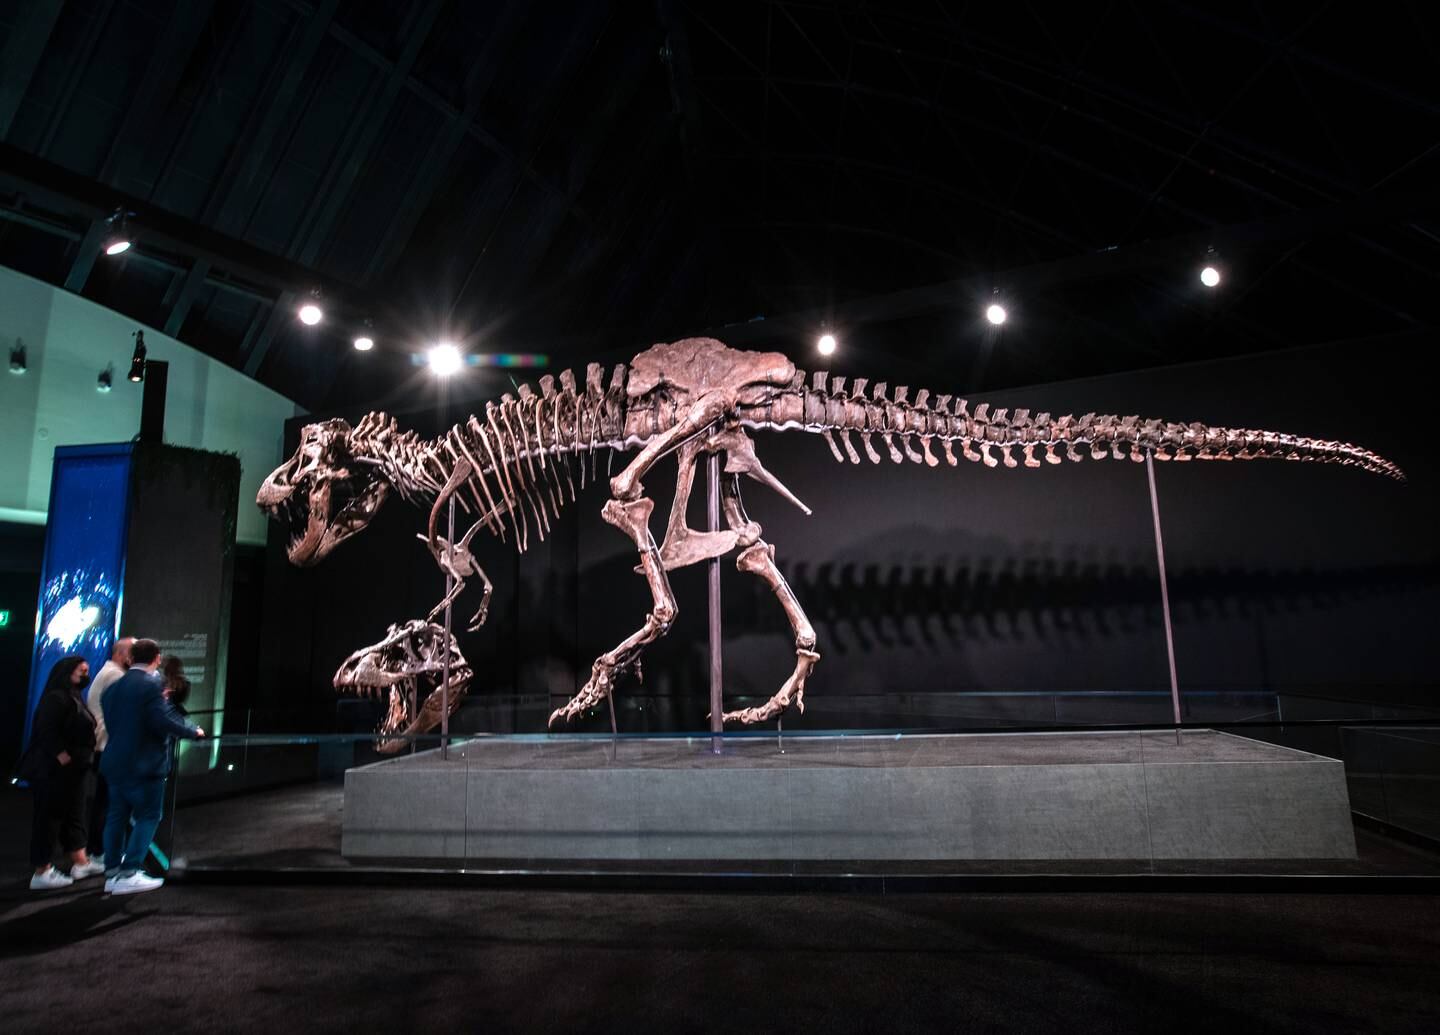 Highlights of the museum will include 'Stan', the world-famous 11.7 metre-tall Tyrannosaurus rex. Victor Besa / The National